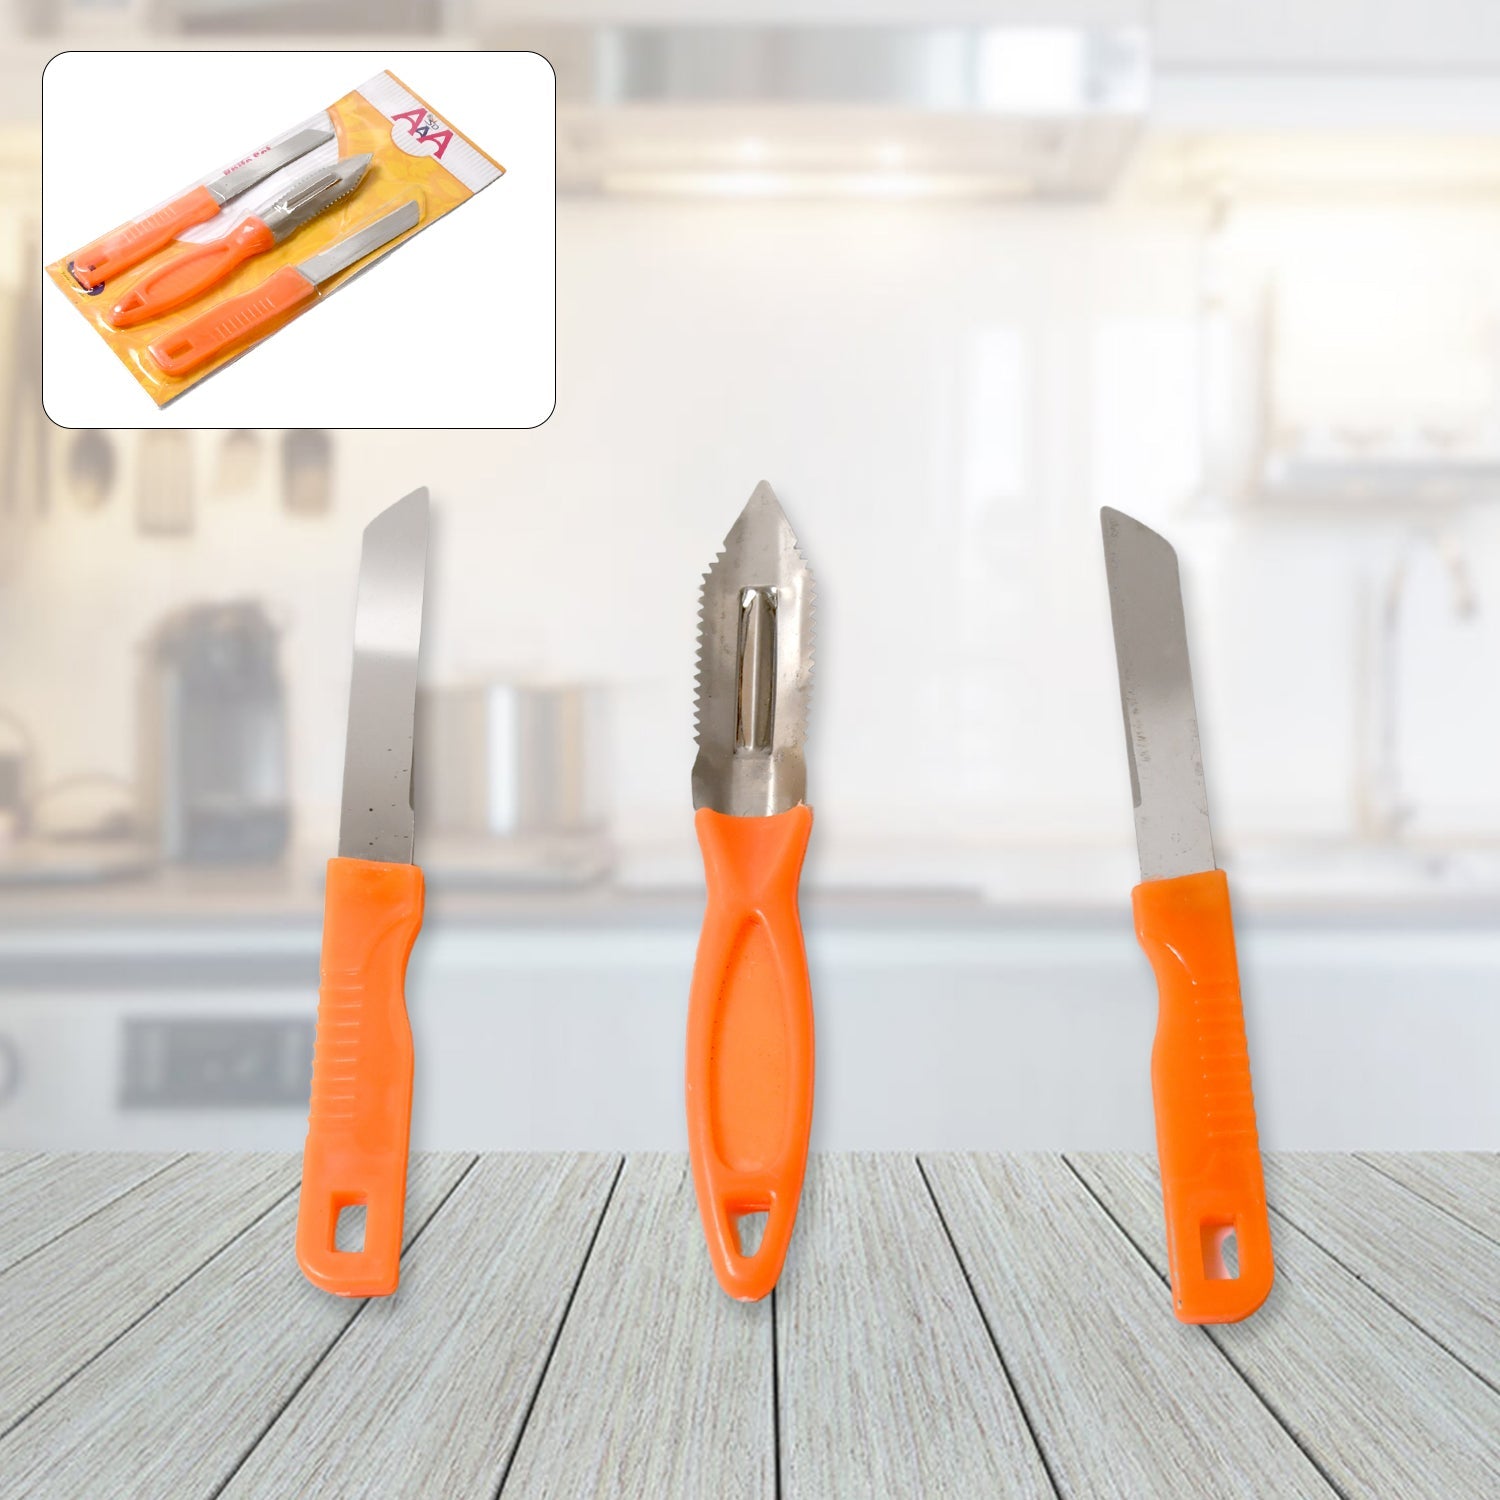 8217 3in1 Multipurpose Stainless Steel Classic Kitchen Knife Set of 3 for Fruits and Vegetable Chopping / Cutting / Peeling, Kitchen Knife / Vegetable Peeler / Plain Knife